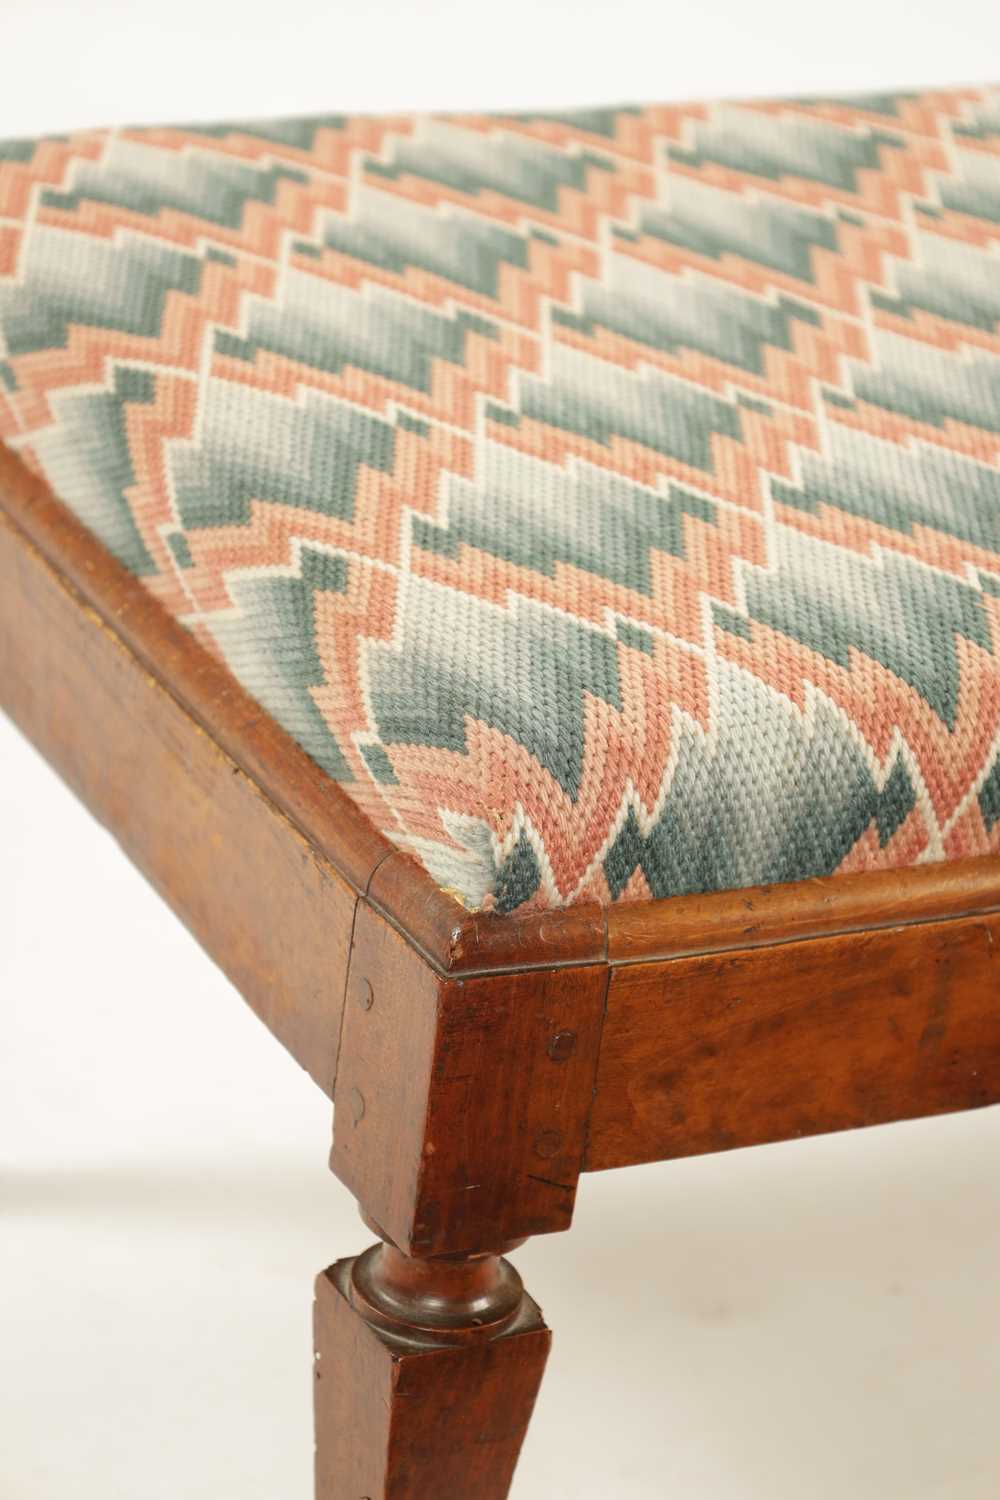 A LATE 18TH CENTURY MAHOGANY UPHOLSTERED DRESSING ROOM STOOL - Image 5 of 6